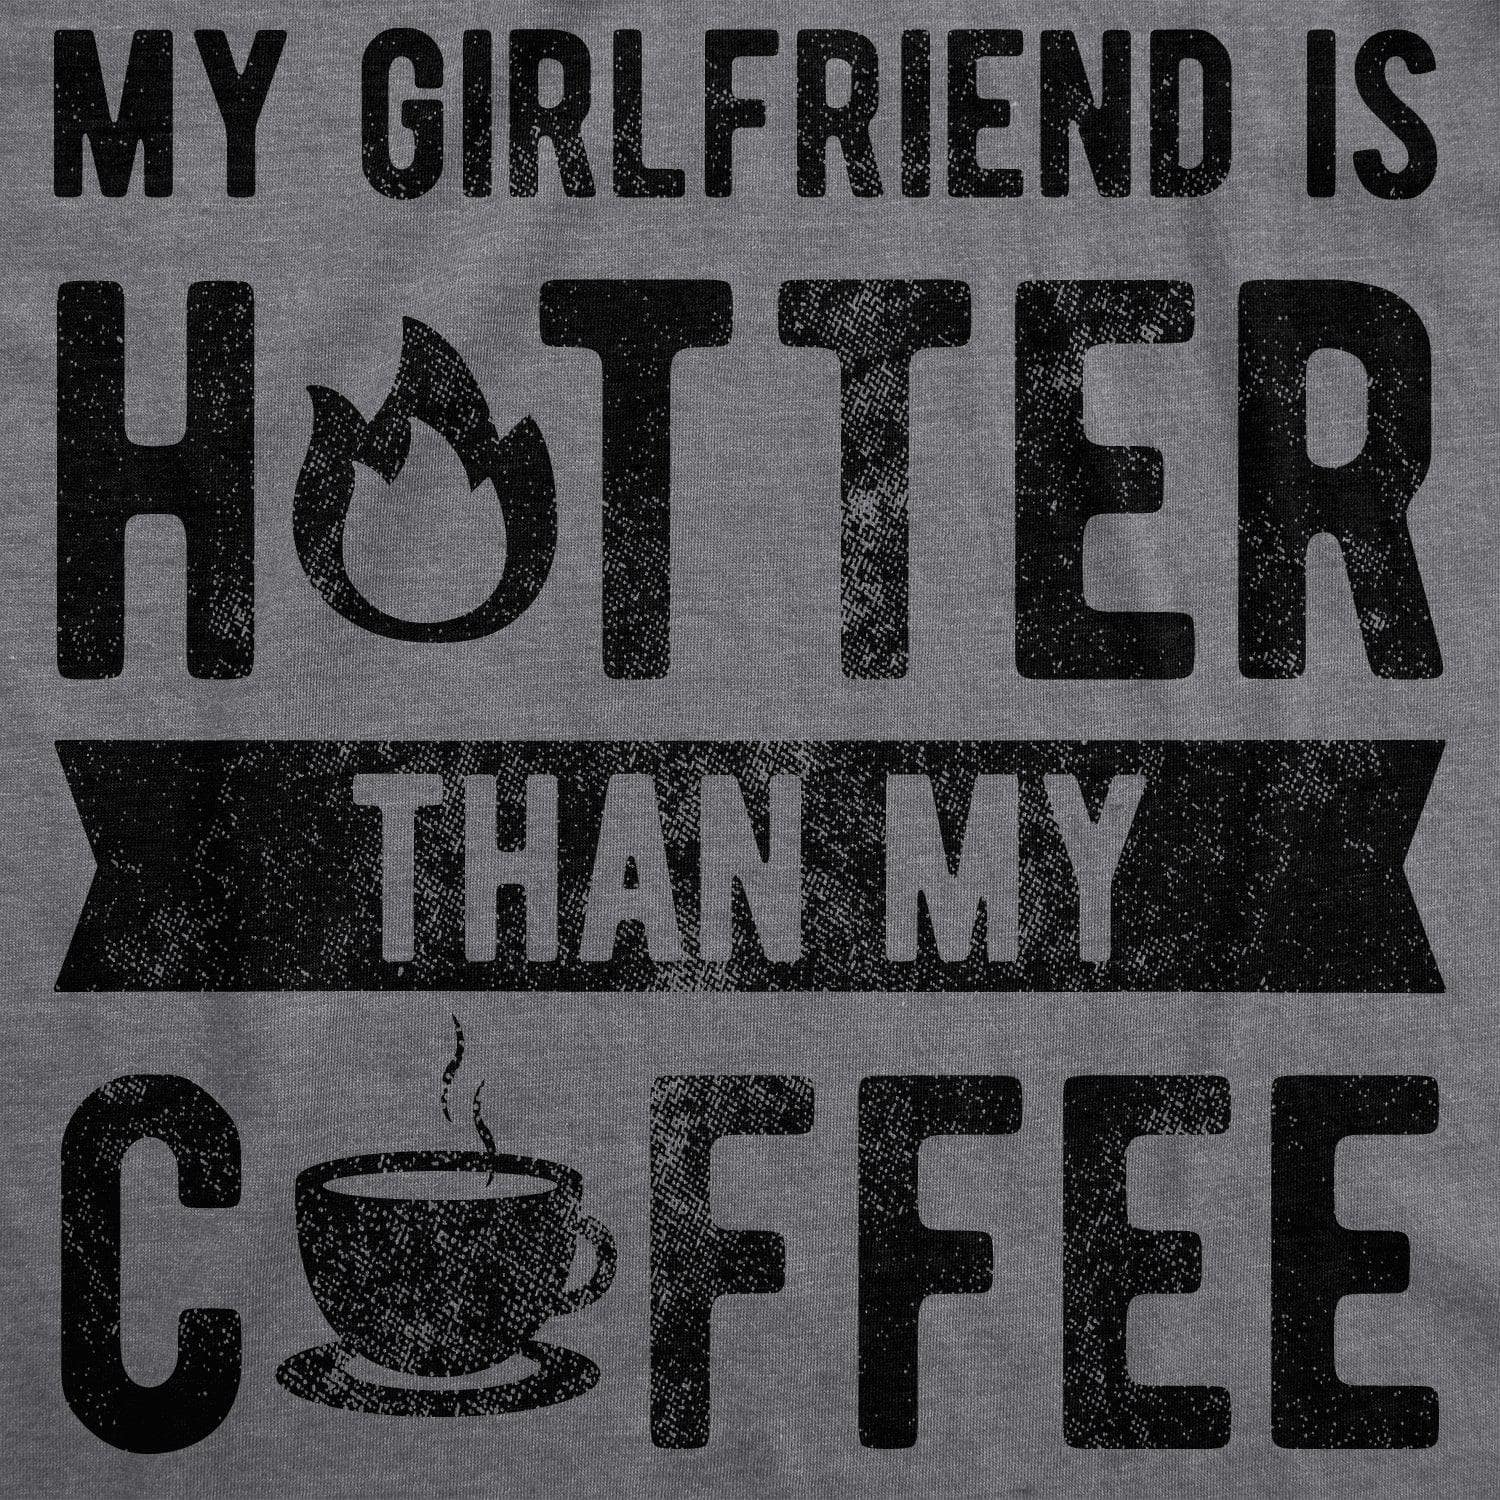 My Girlfriend Is Hotter Than My Coffee Men's Tshirt  -  Crazy Dog T-Shirts